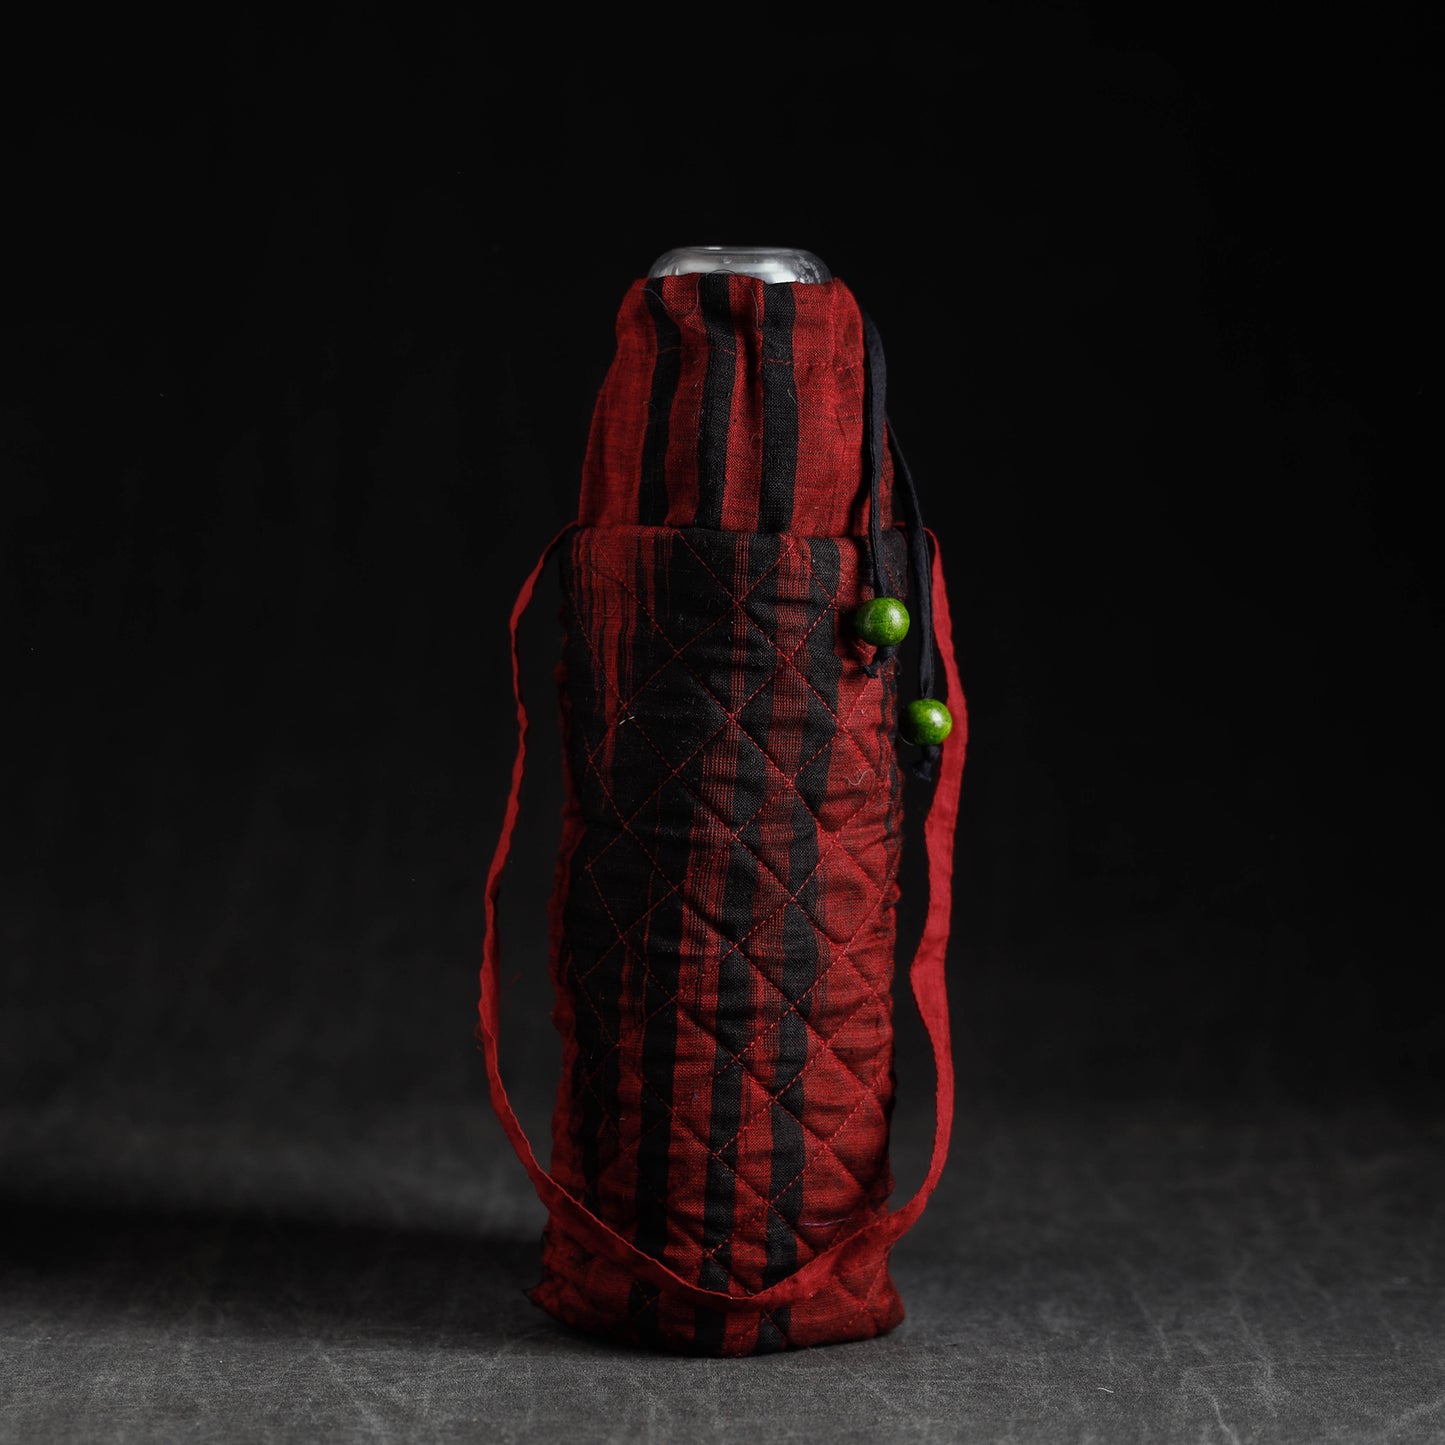 Water Bottle Cover
